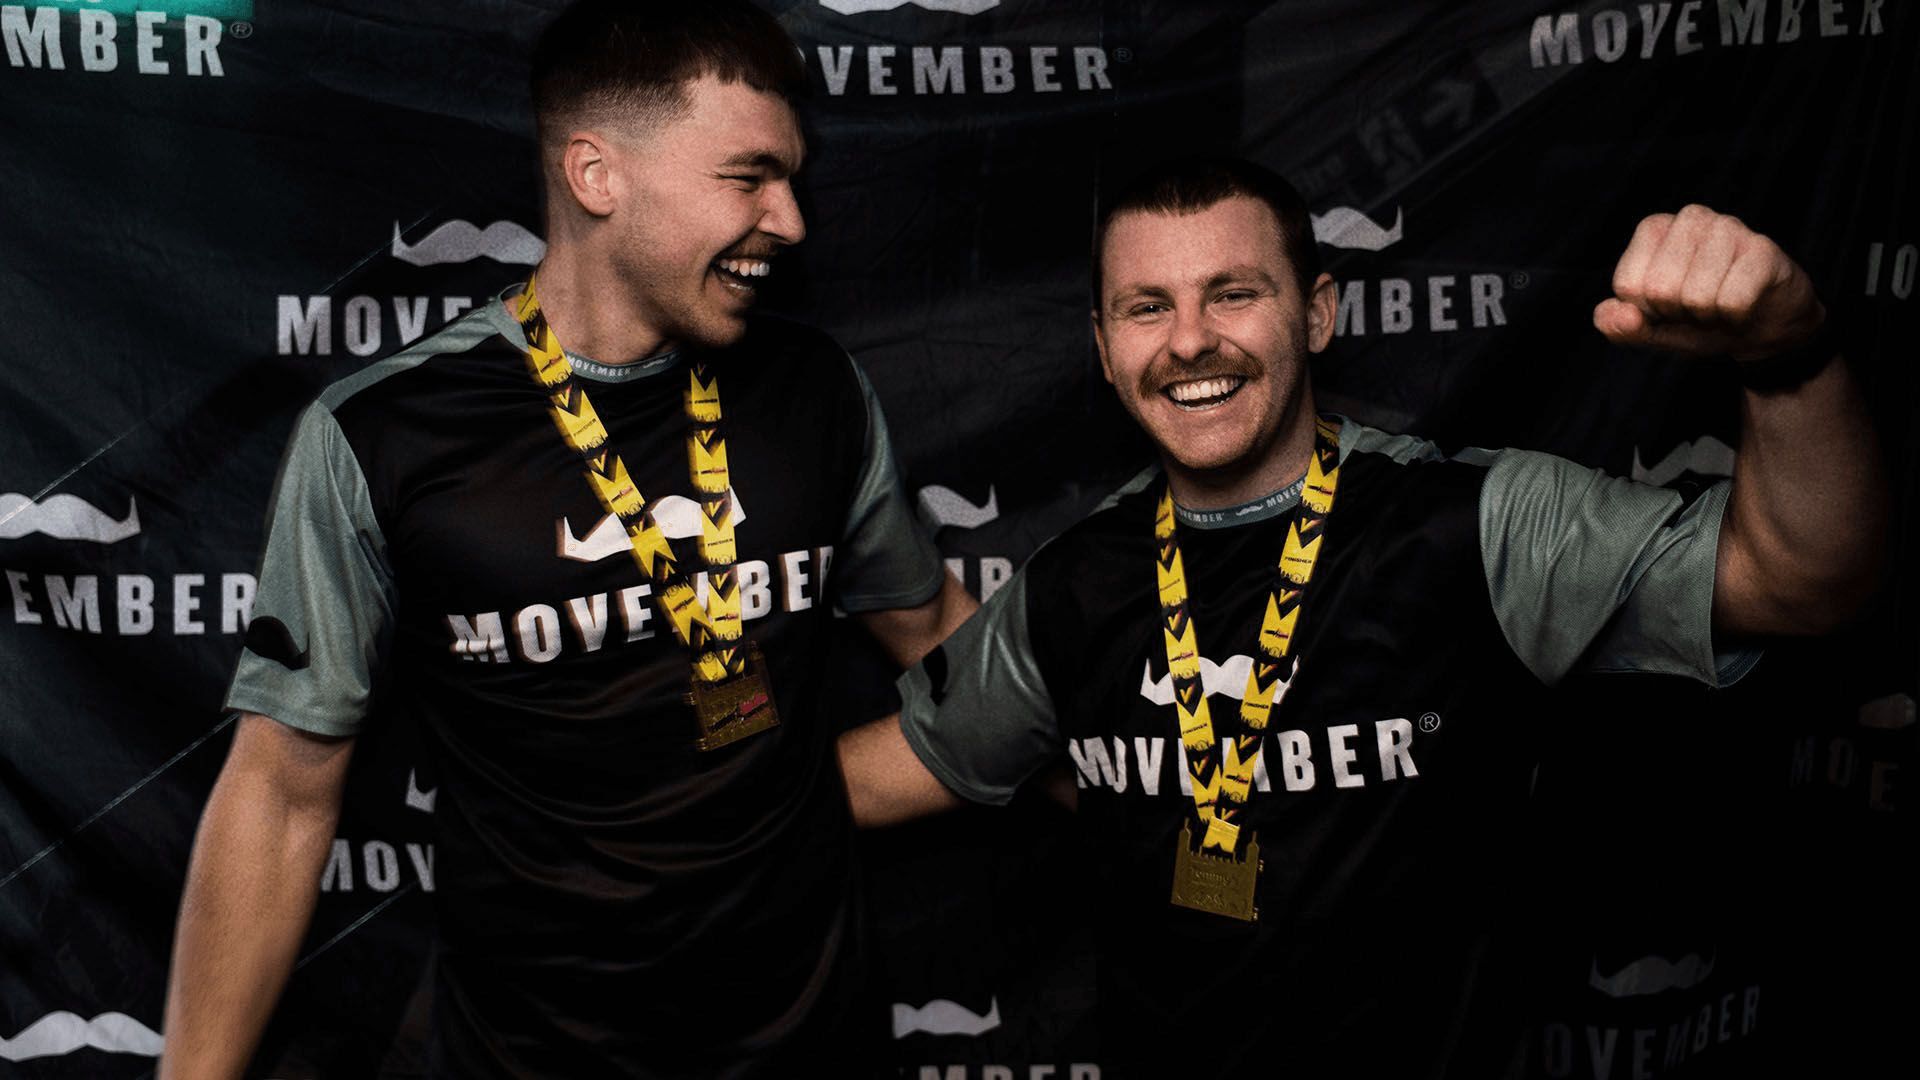 Two marathon runners in Movember-branded attire, triumphantly posing in front of Movember banner after finishing their race.